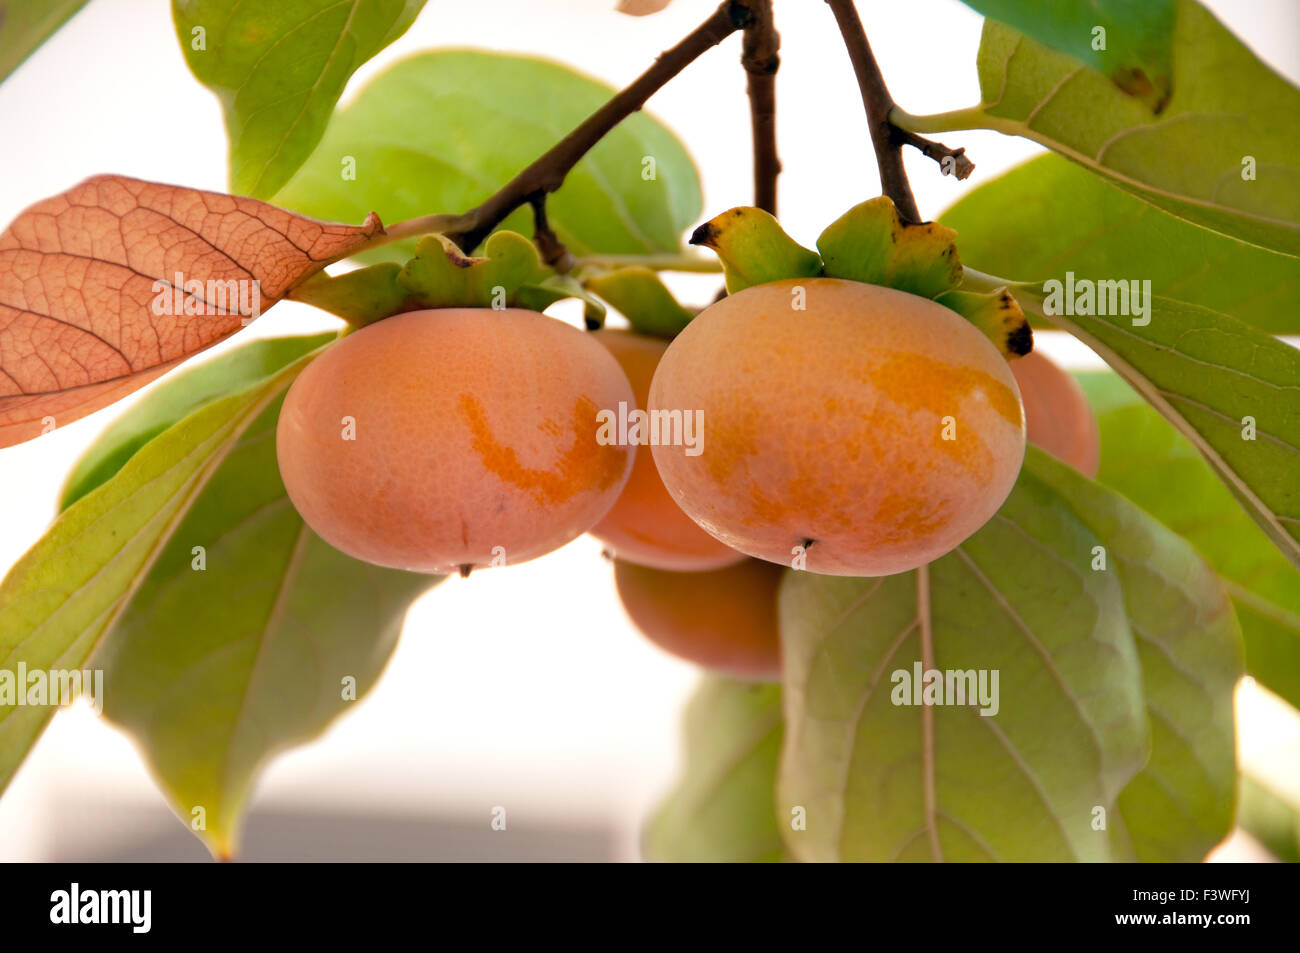 bunch of fuyu persimmons ready for picking Stock Photo